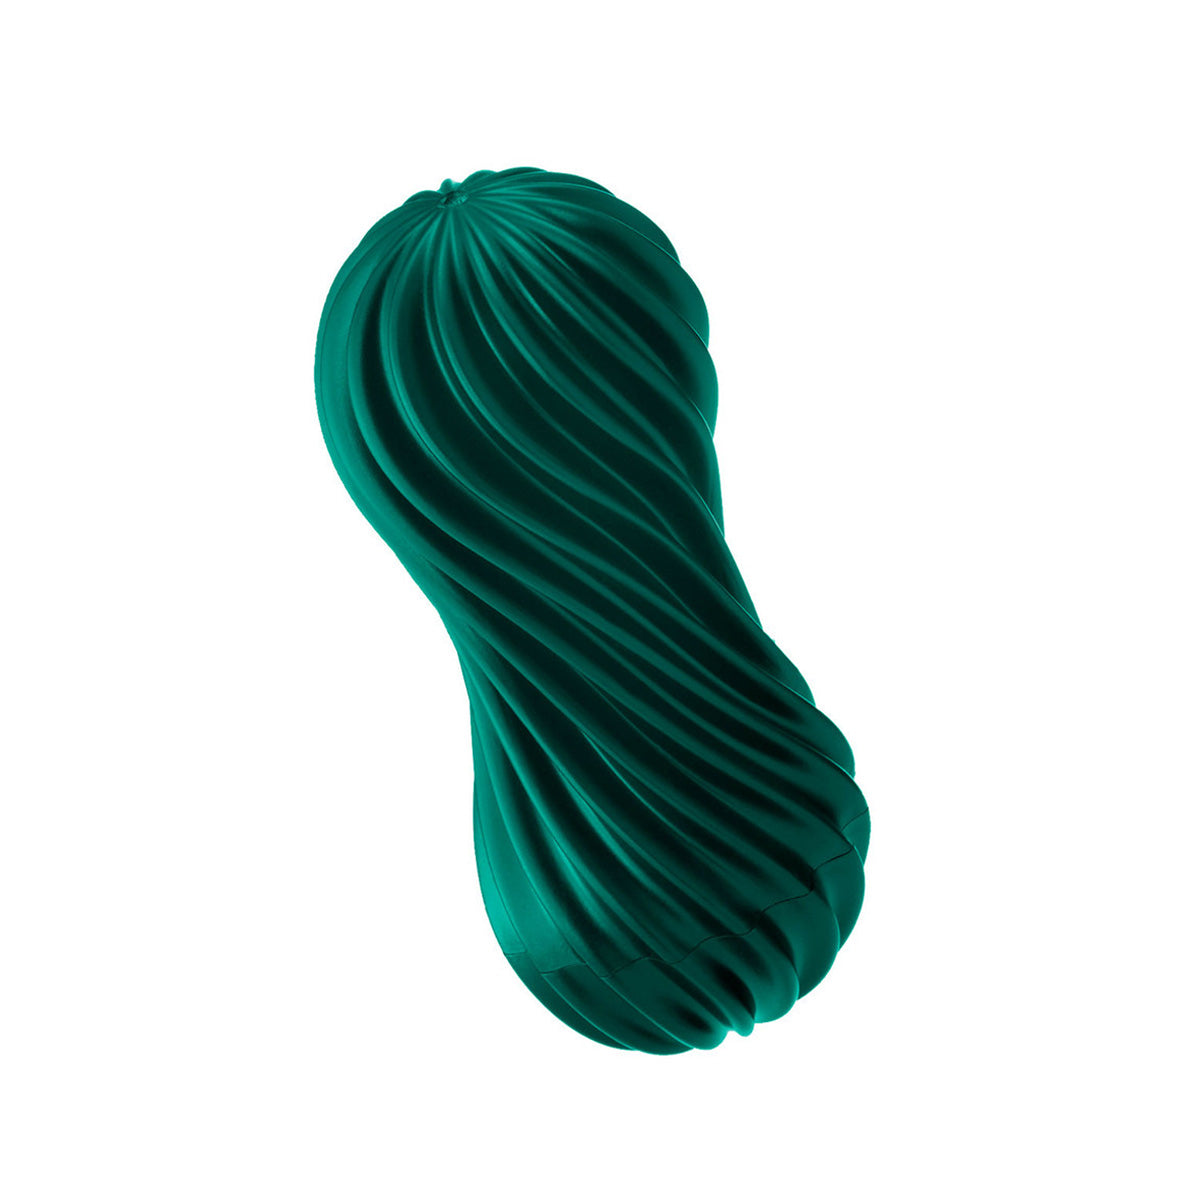 Green penis masturbation sleeve with spiral-ribbed casing Nudie Co